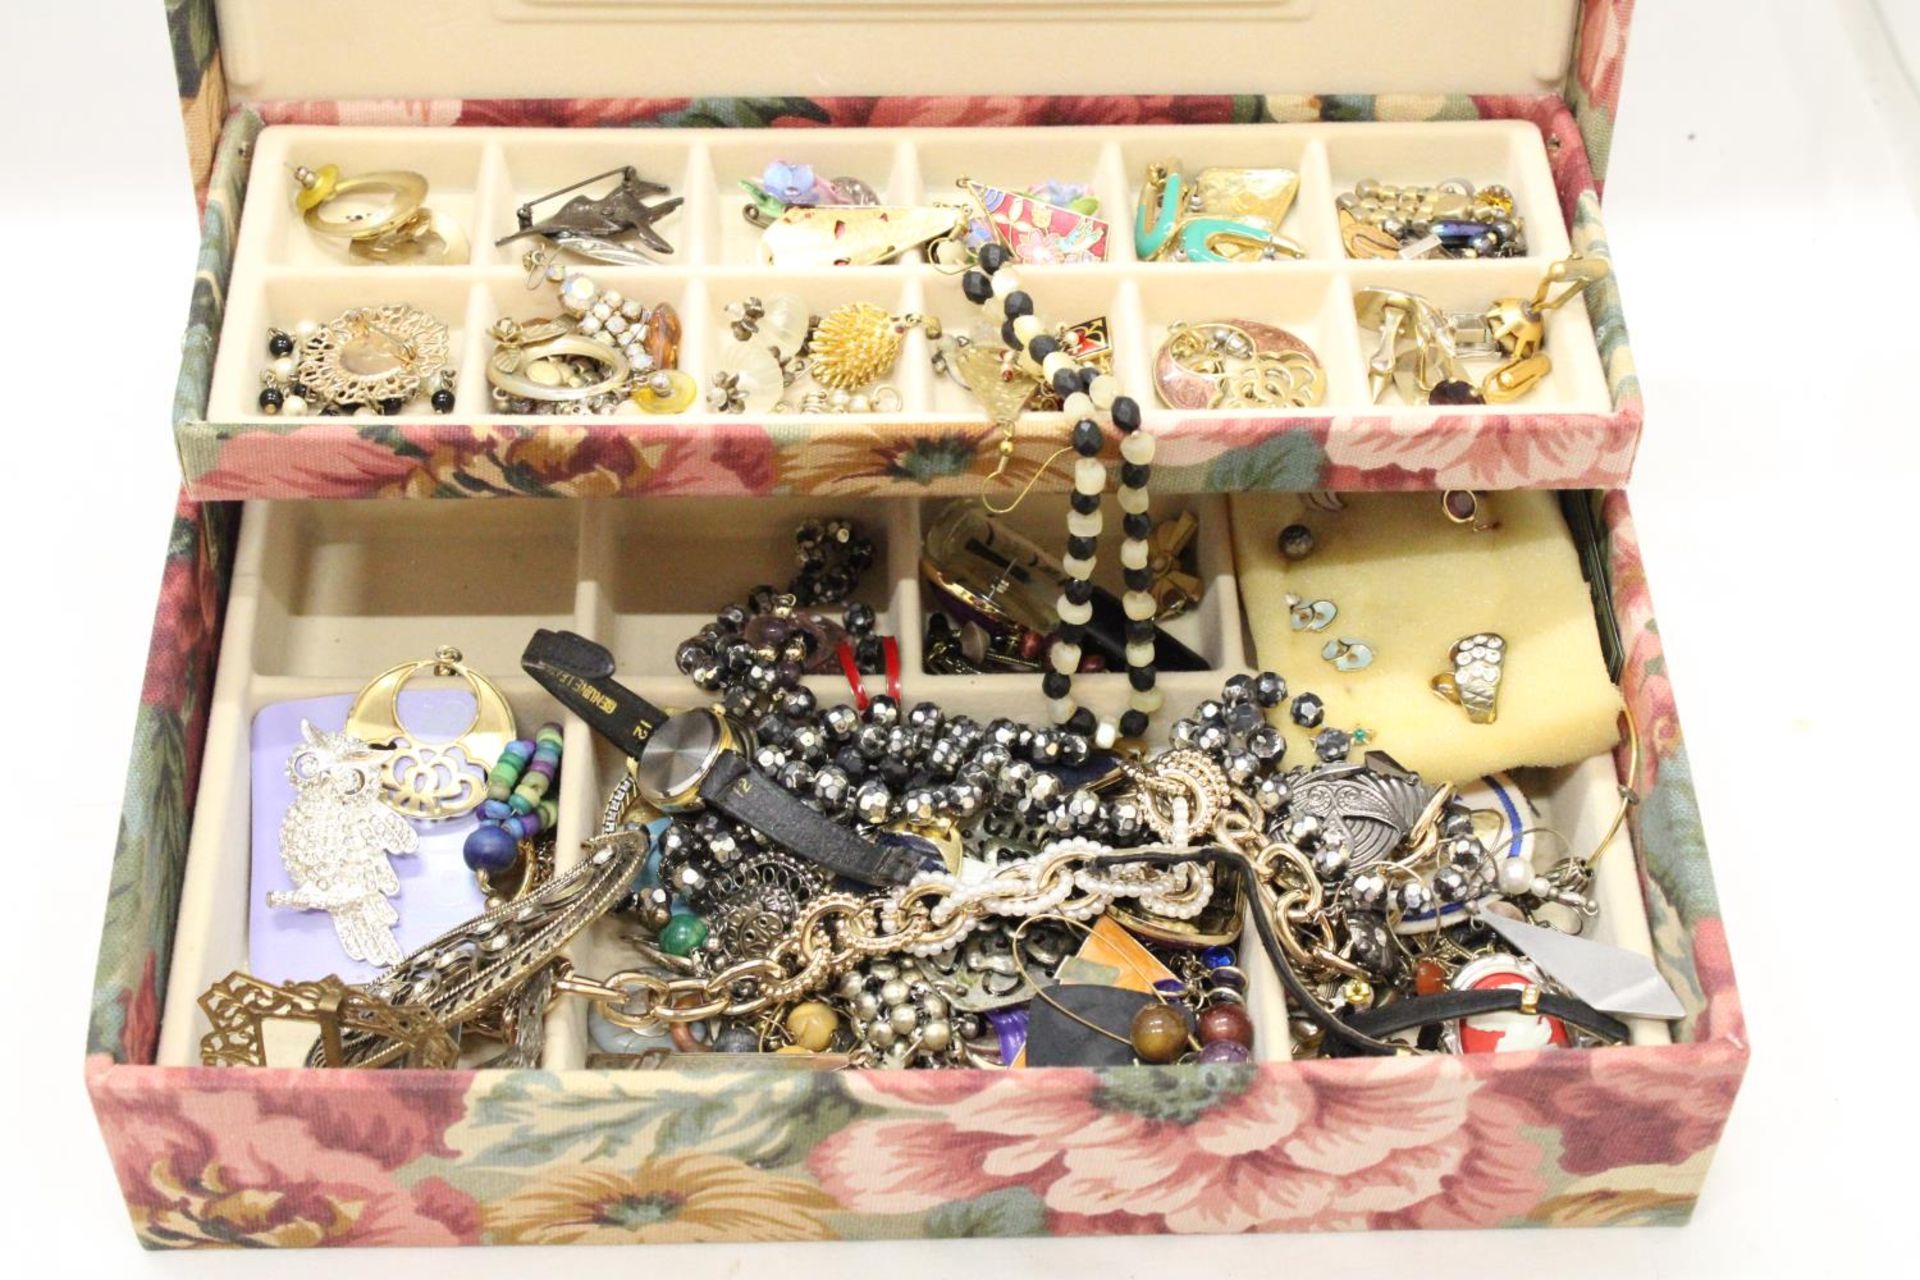 A VINTAGE JEWELLERY BOX CONTAINING VARIOUS COSTUME JEWELLERY INCLUDING EARRINGS, BROOCHS, - Image 3 of 6